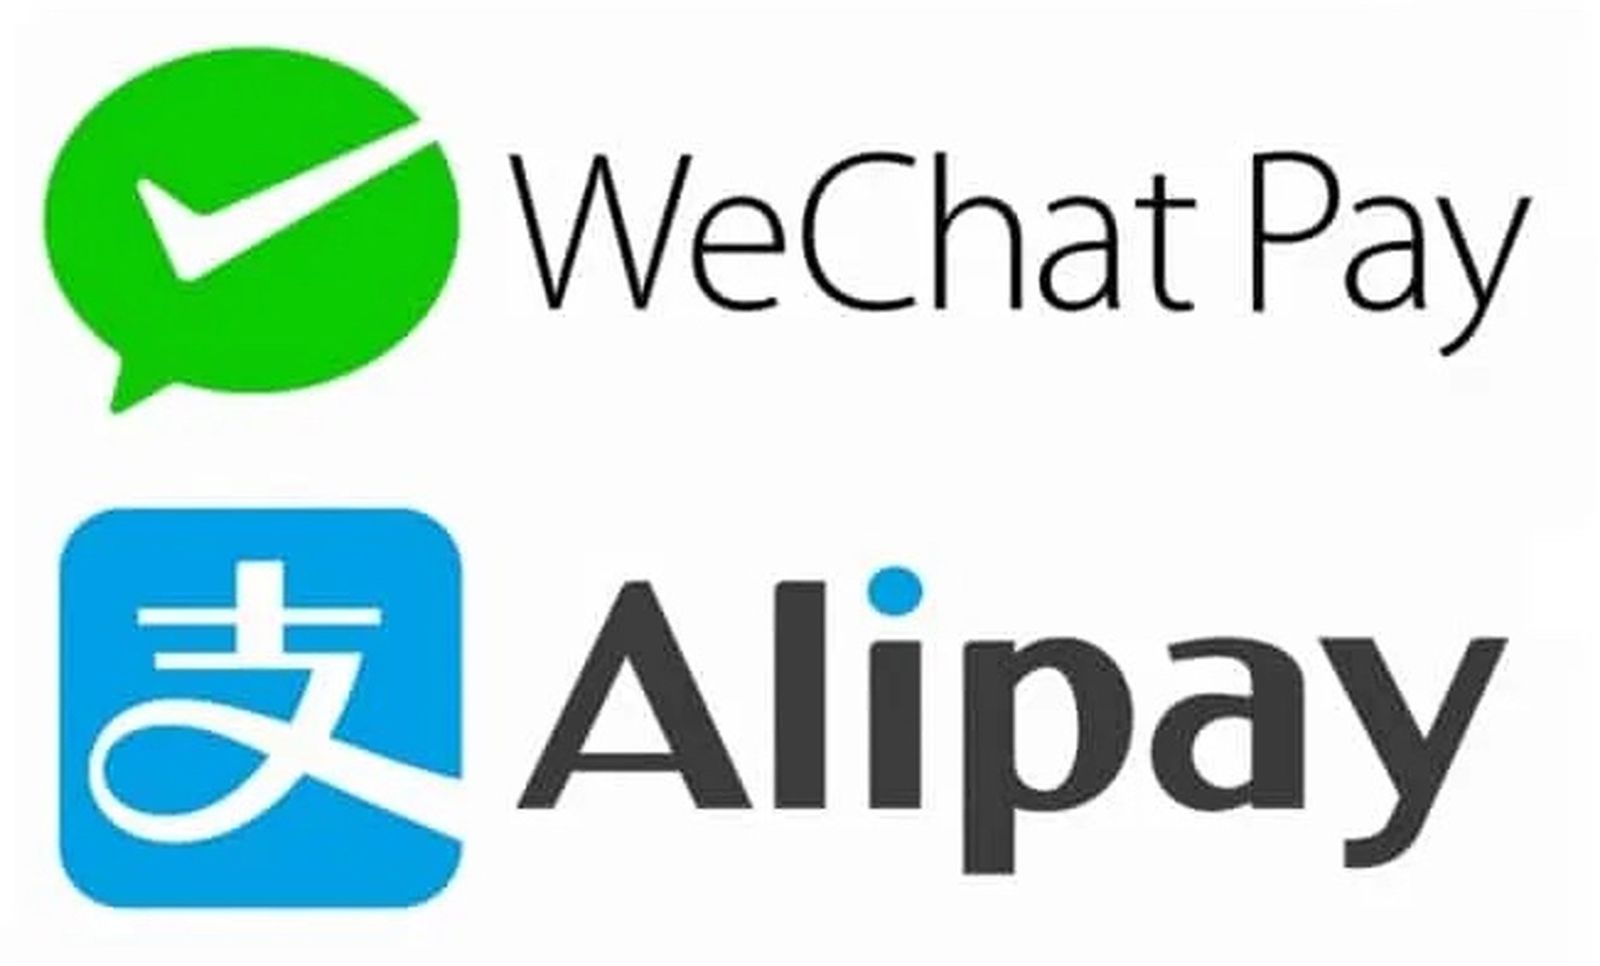 Trump signs executive order to ban US transactions with WeChat Pay and 7 other Chinese apps